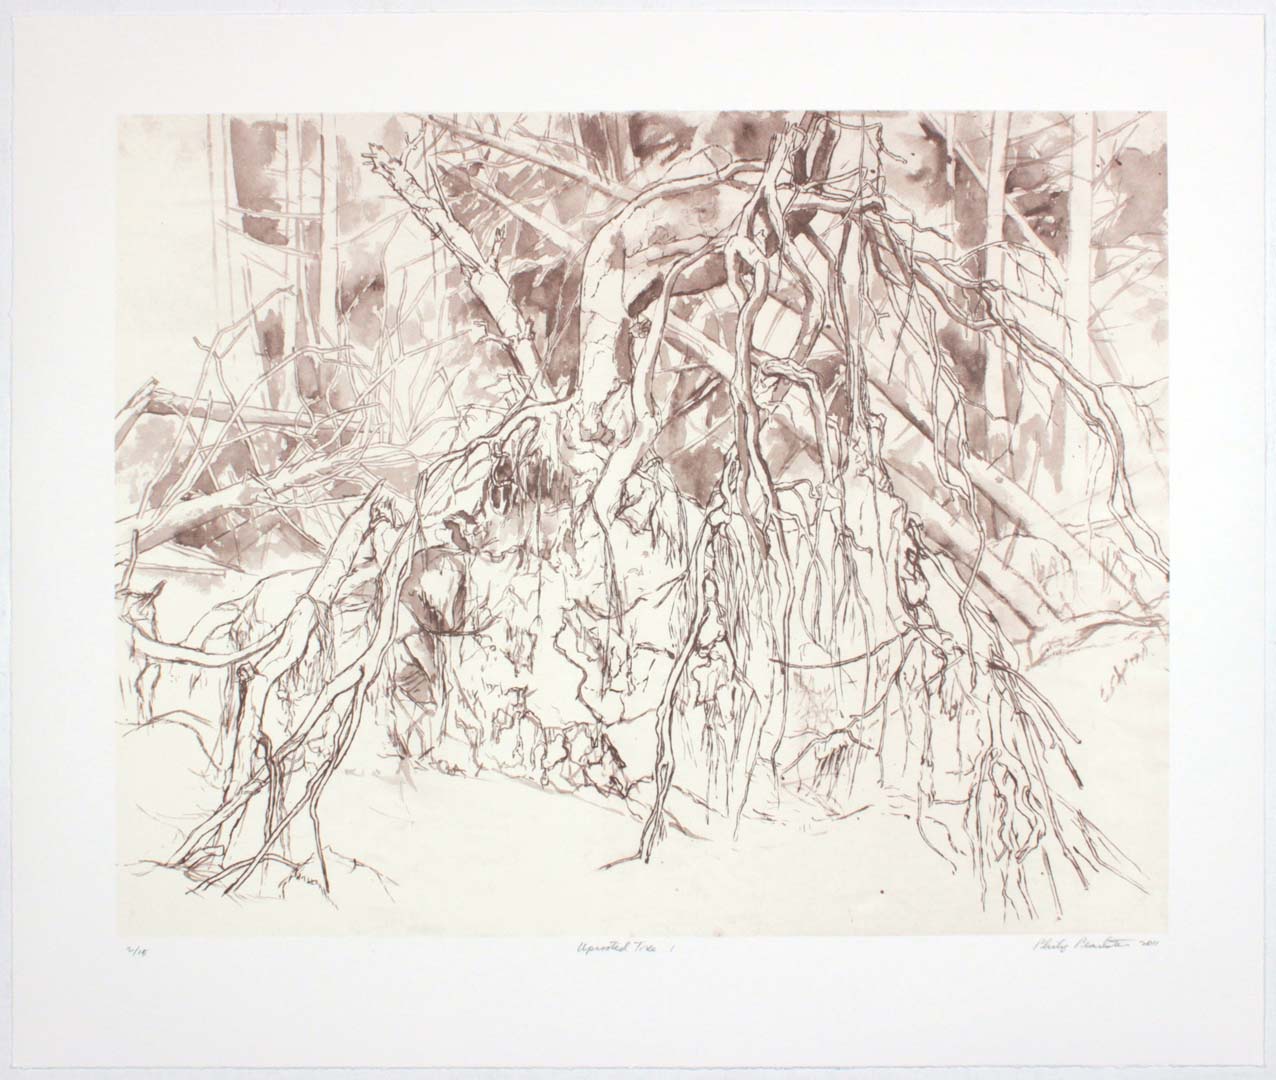 2011 Uprooted Tree #1 Lithograph on Paper 20.625 x 24.625